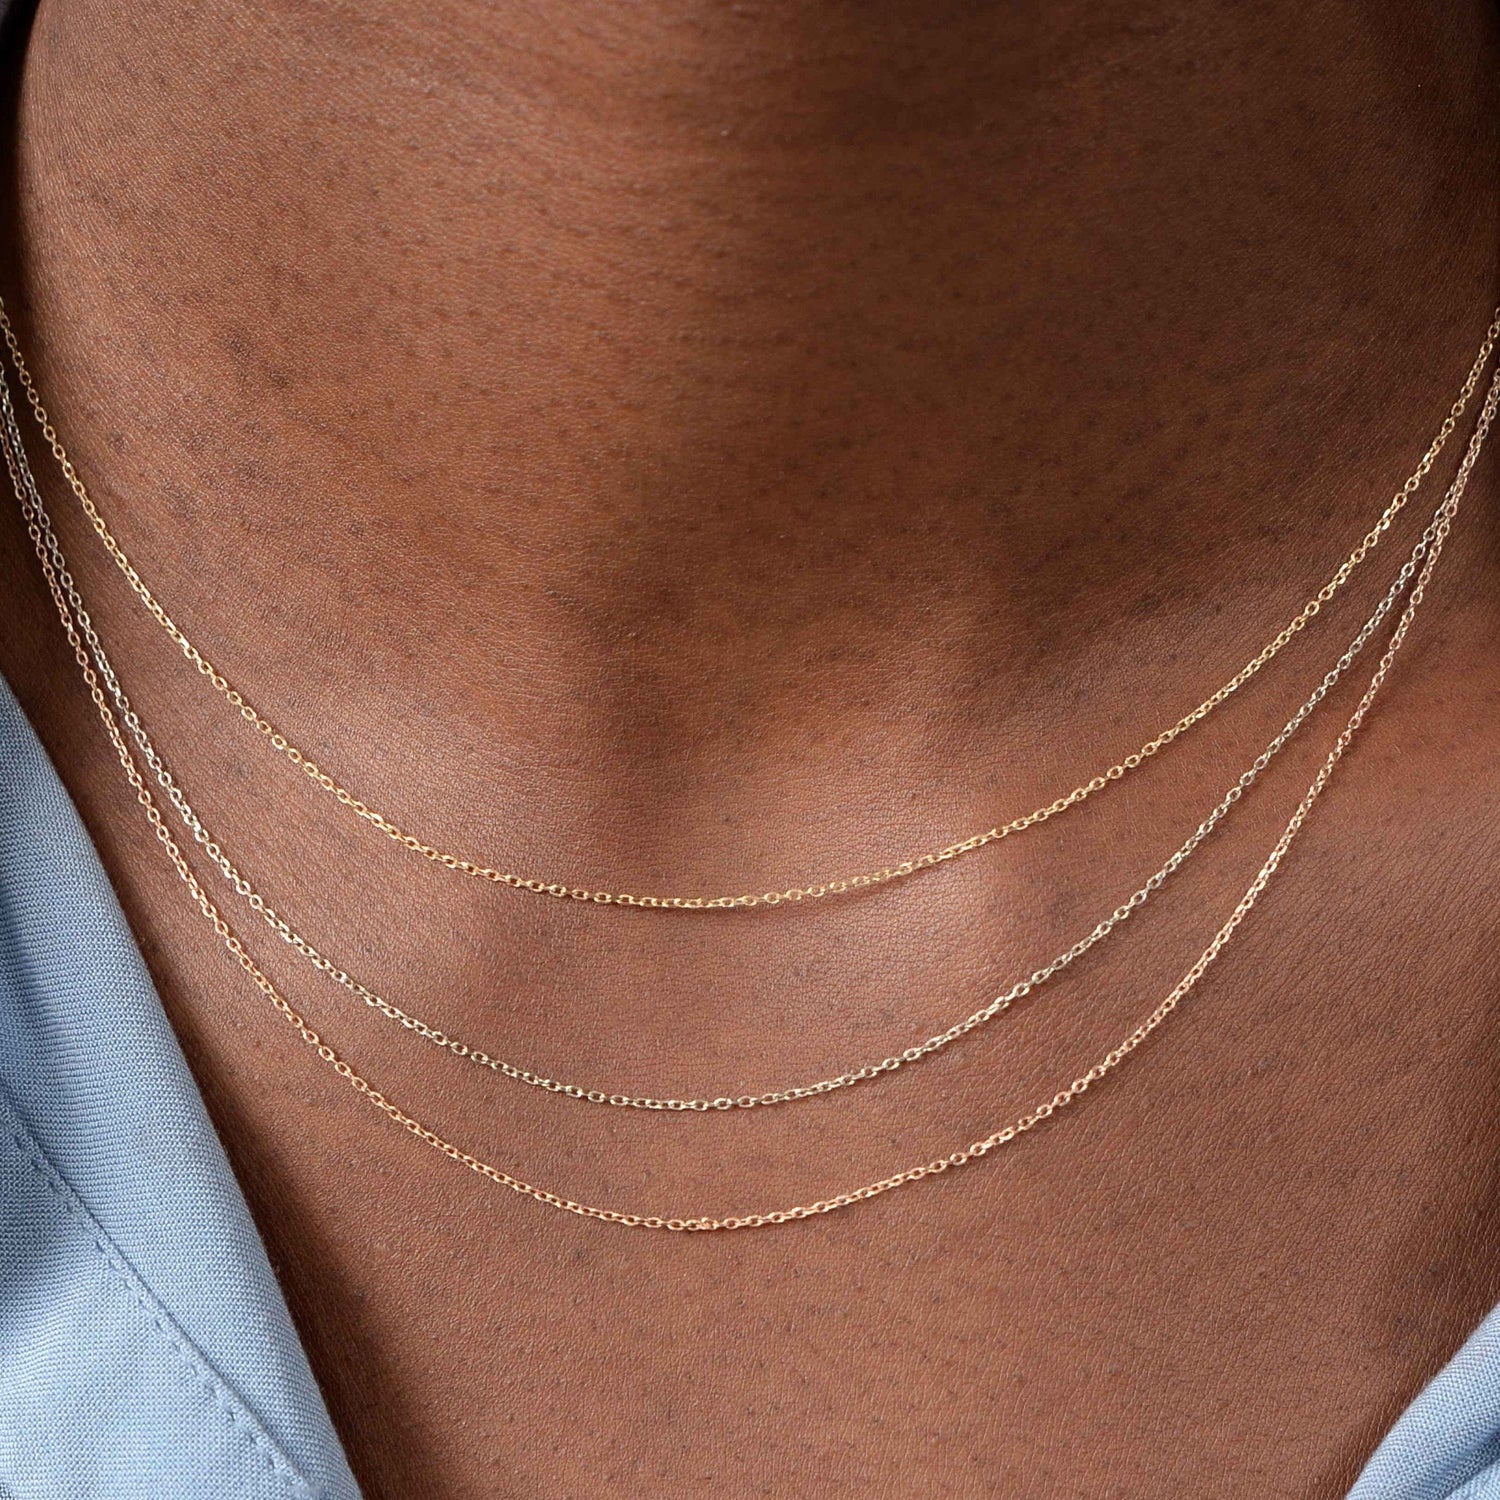 Solid Gold Layered Chain Necklace / 14K Solid Gold Layering Necklace / 3 Layer Chain Necklace / Solid Gold Necklace / Christmas Sale